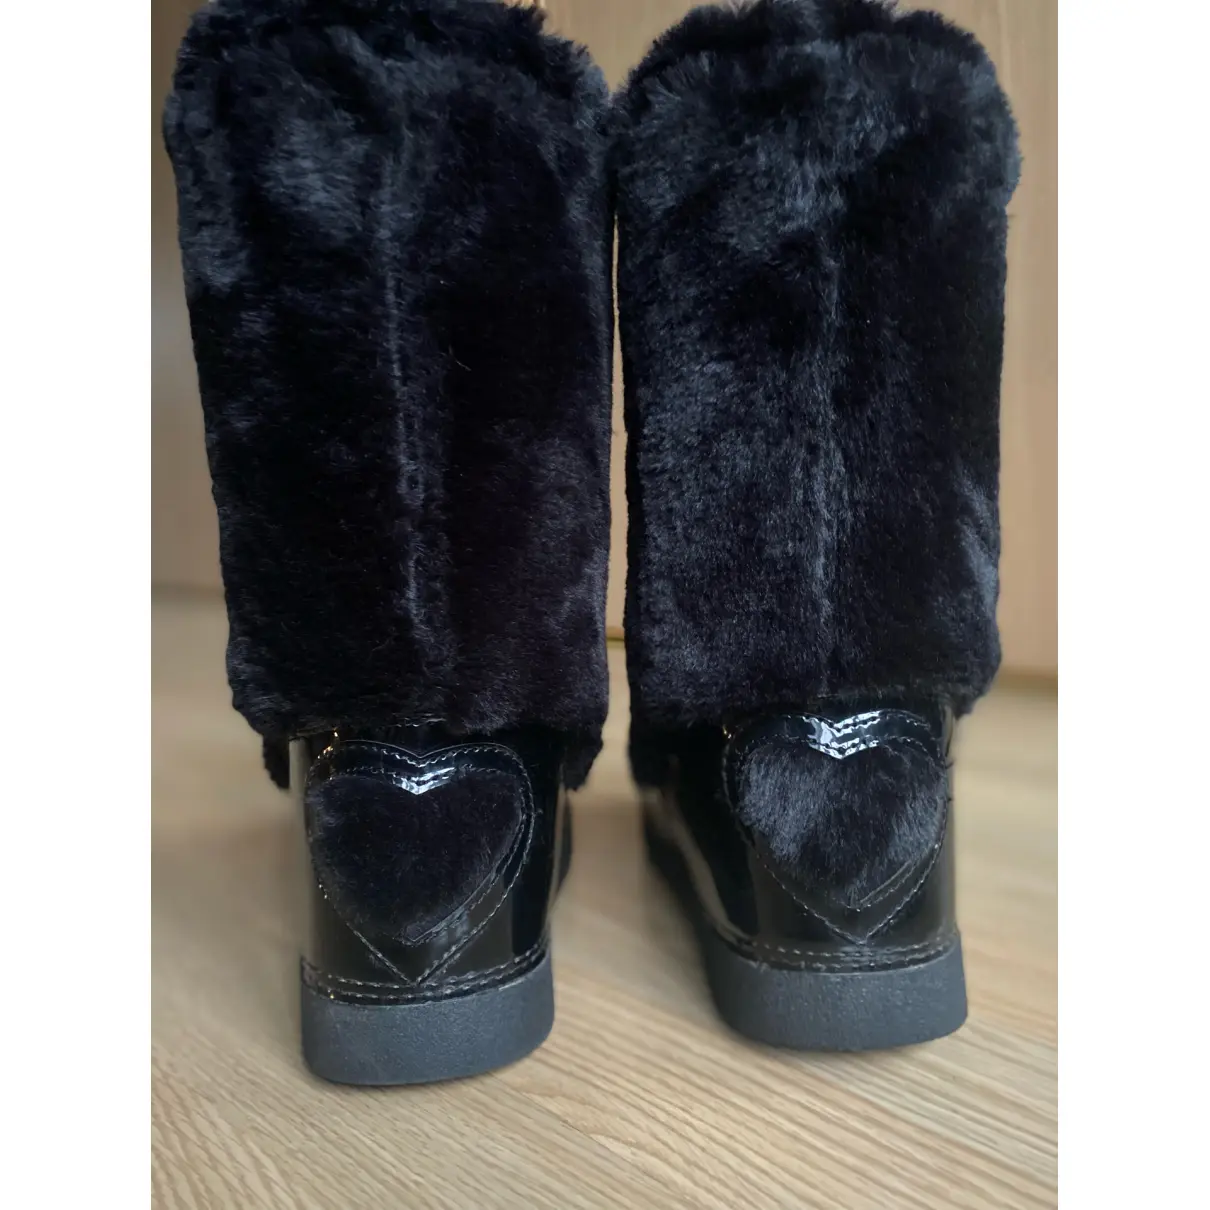 Buy Moschino Love Faux fur ankle boots online